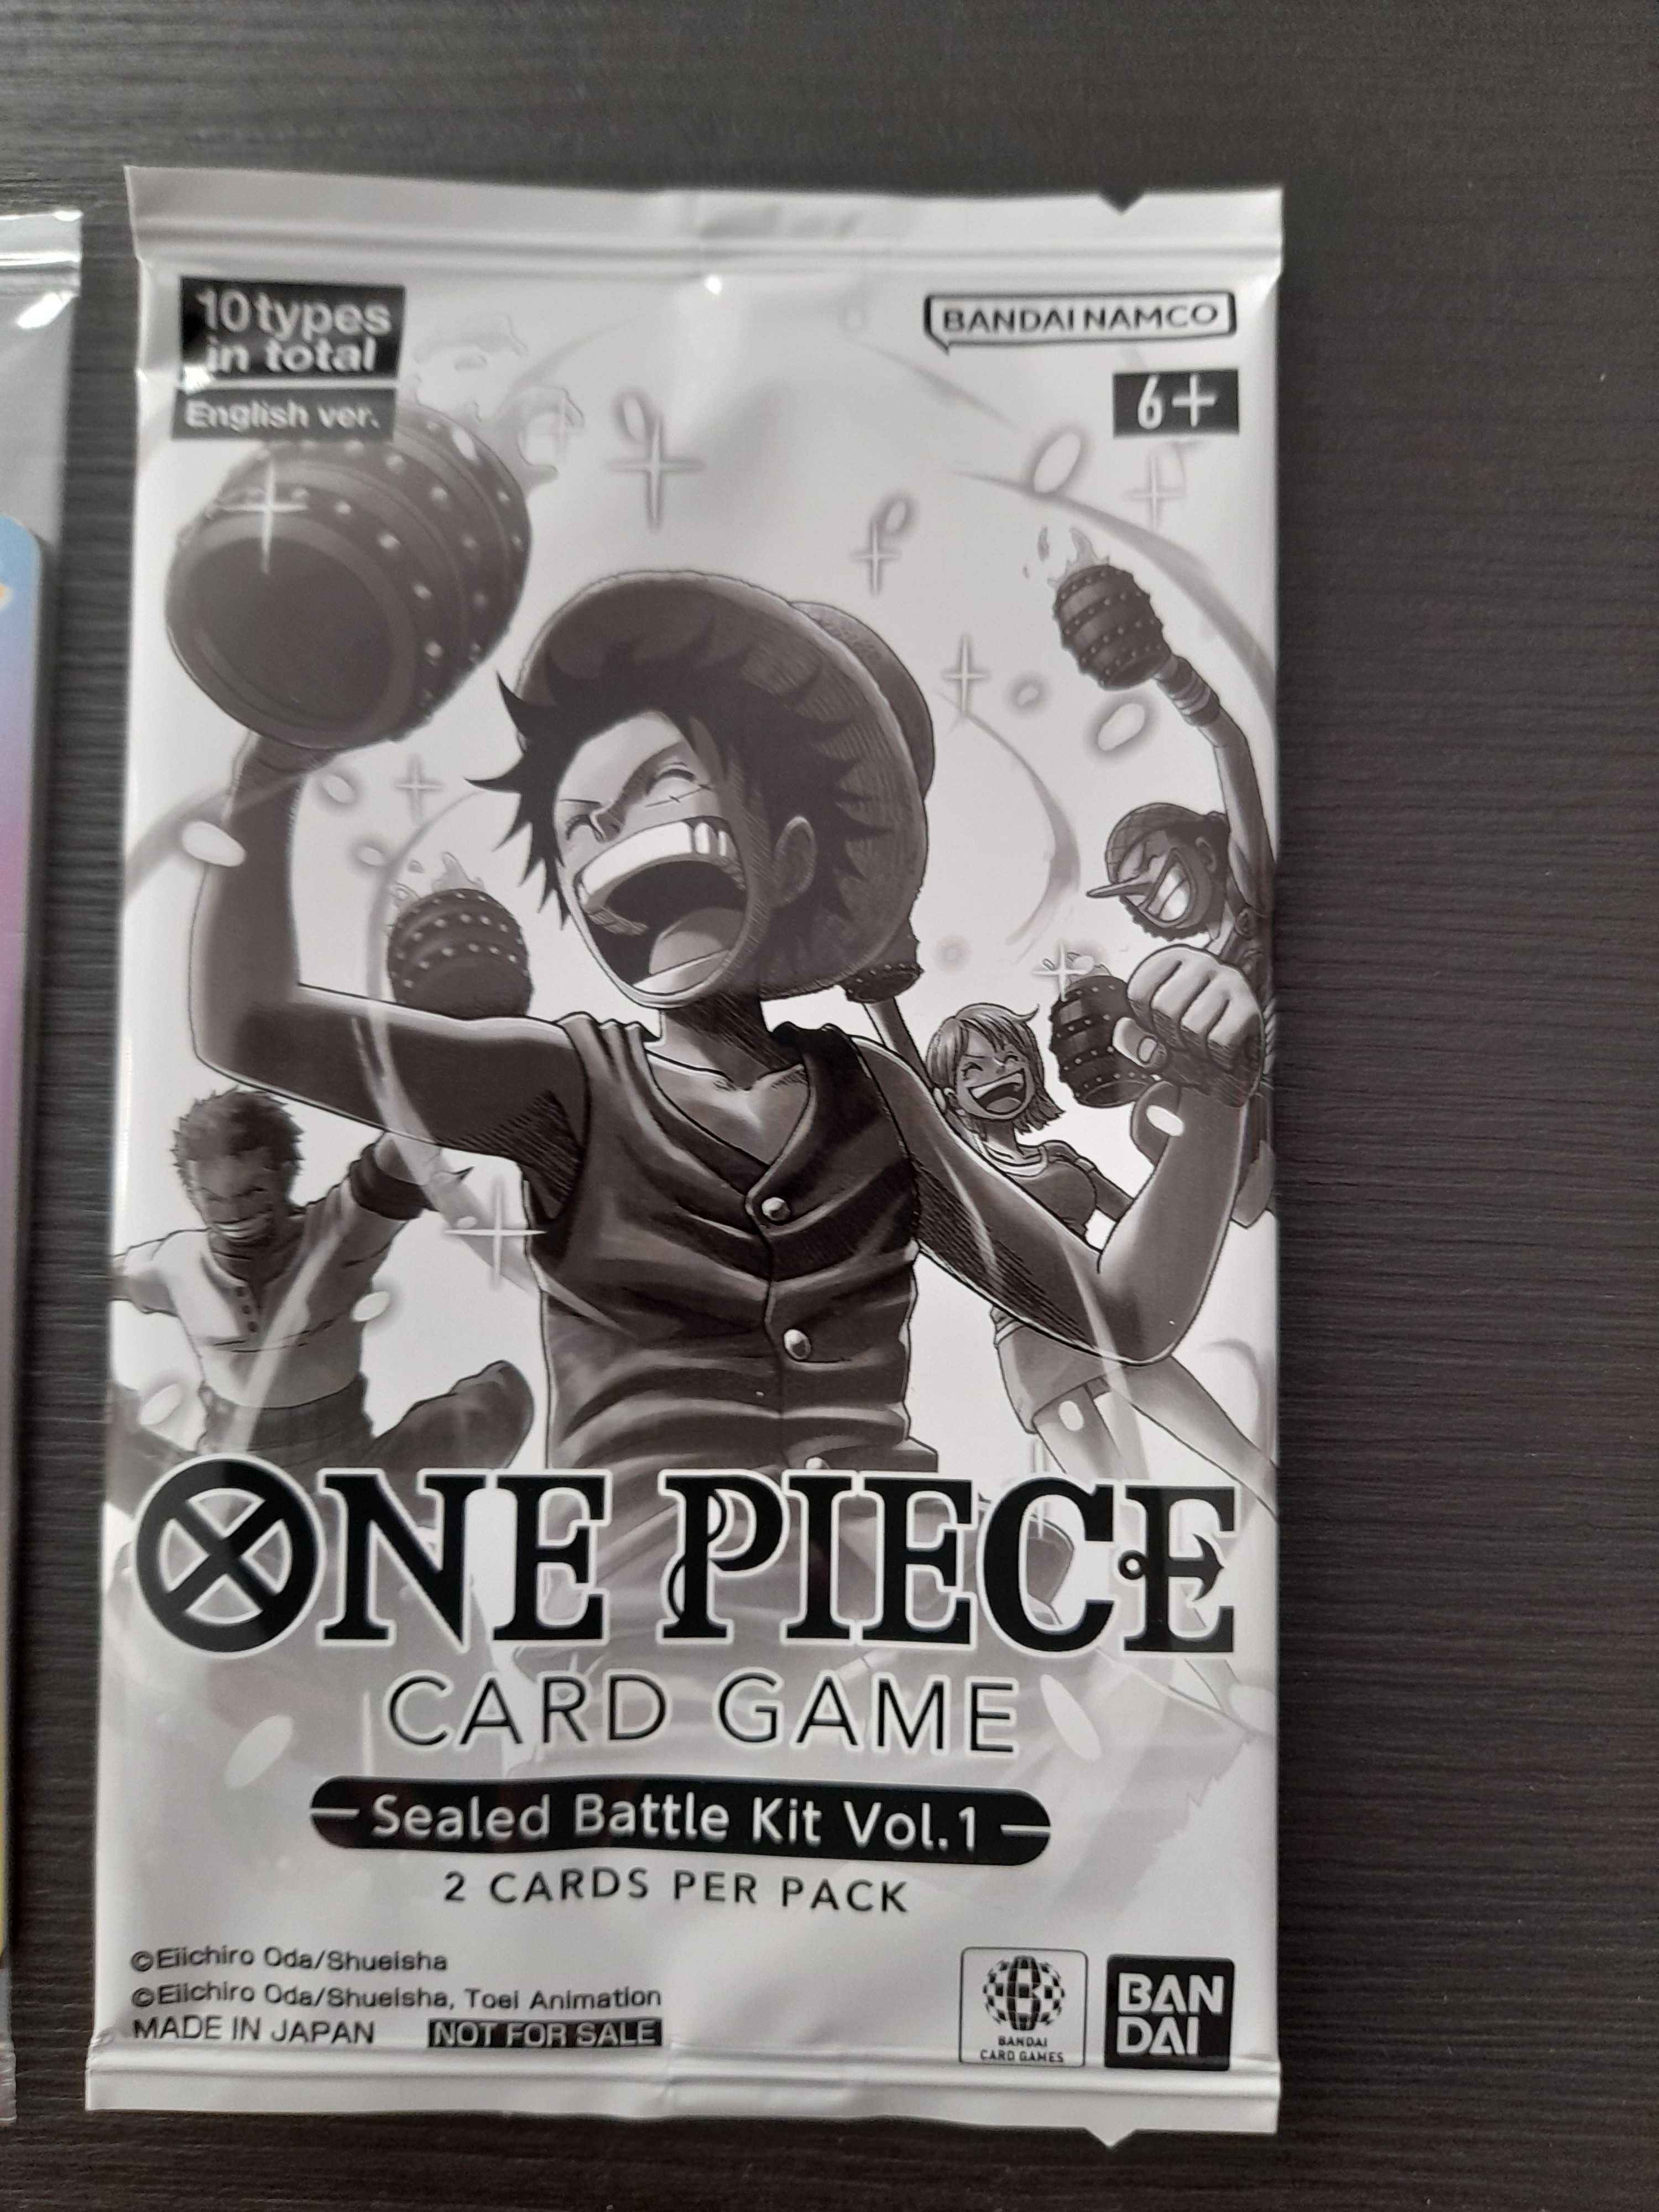 One Piece card game Sealed Battle Kit Vol.1